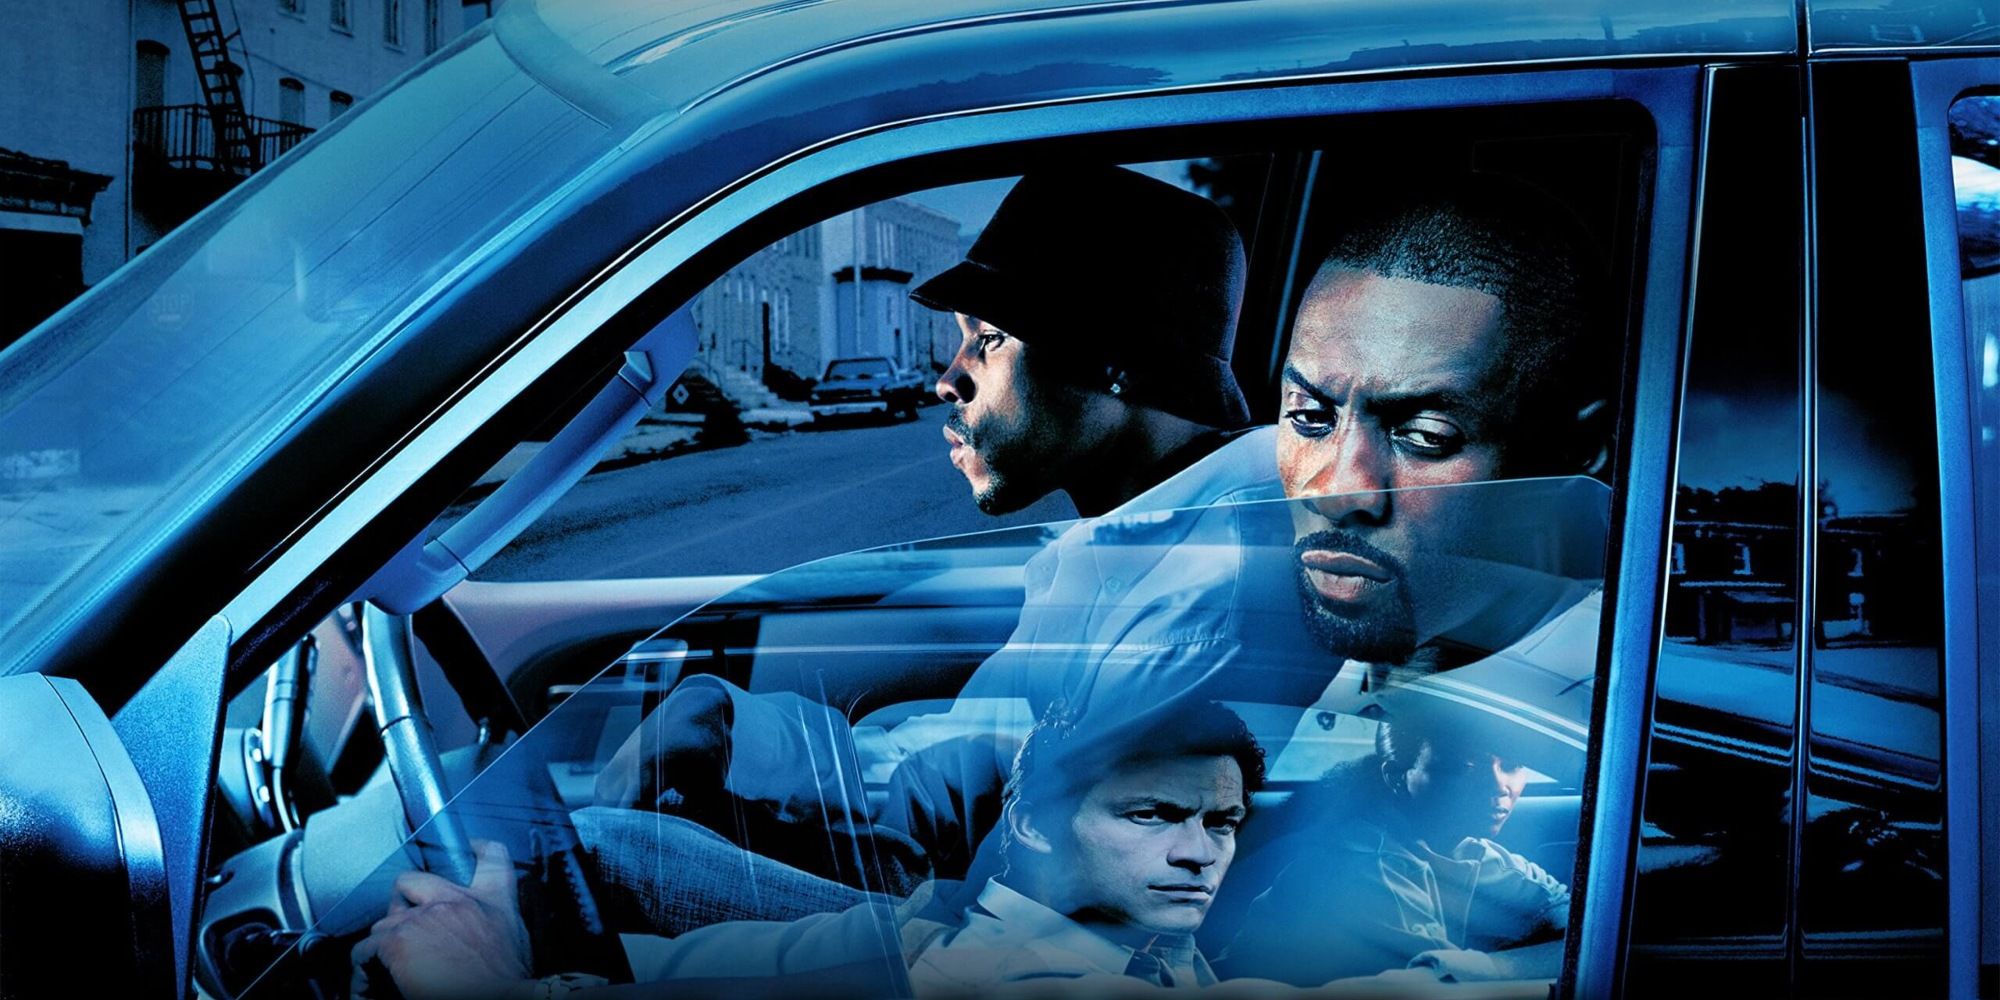 Two men in a car in The Wire.